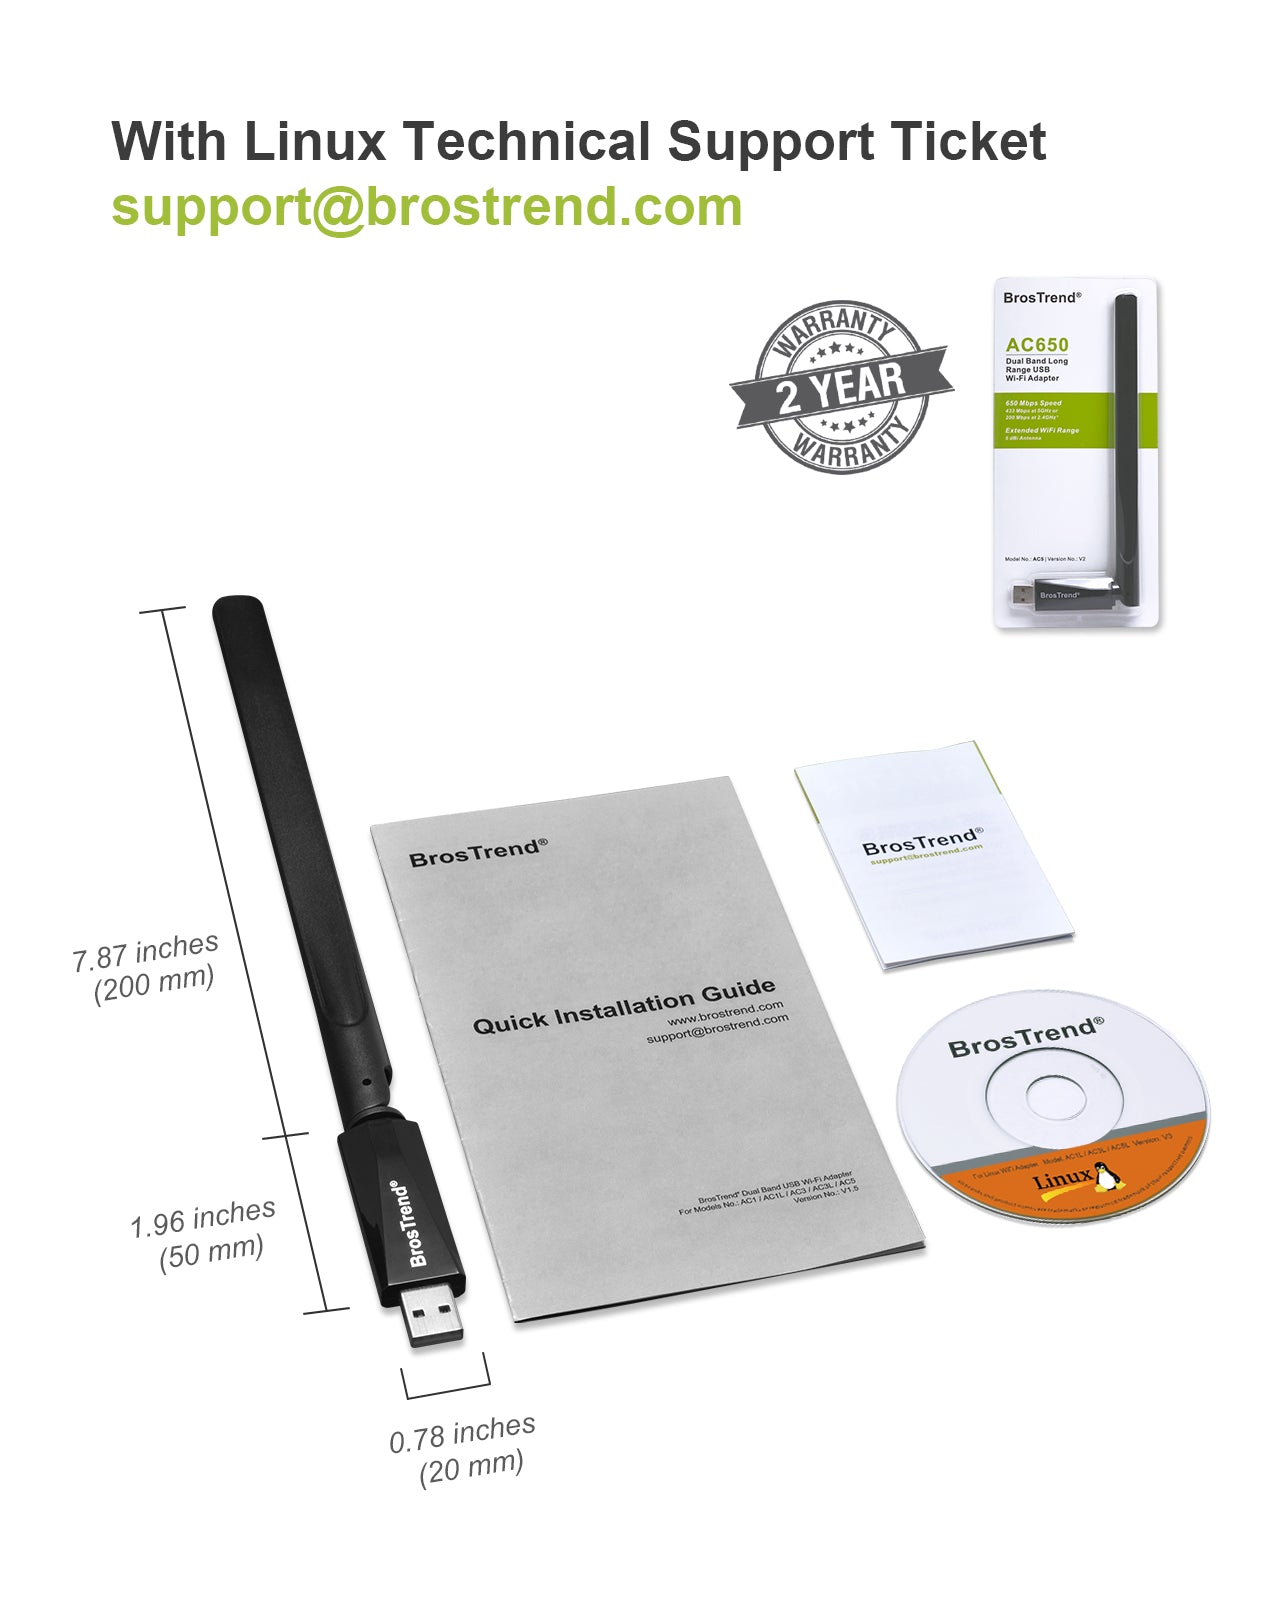 BrosTrend 650Mbps Long Range Linux WiFi Adapter For CA Market